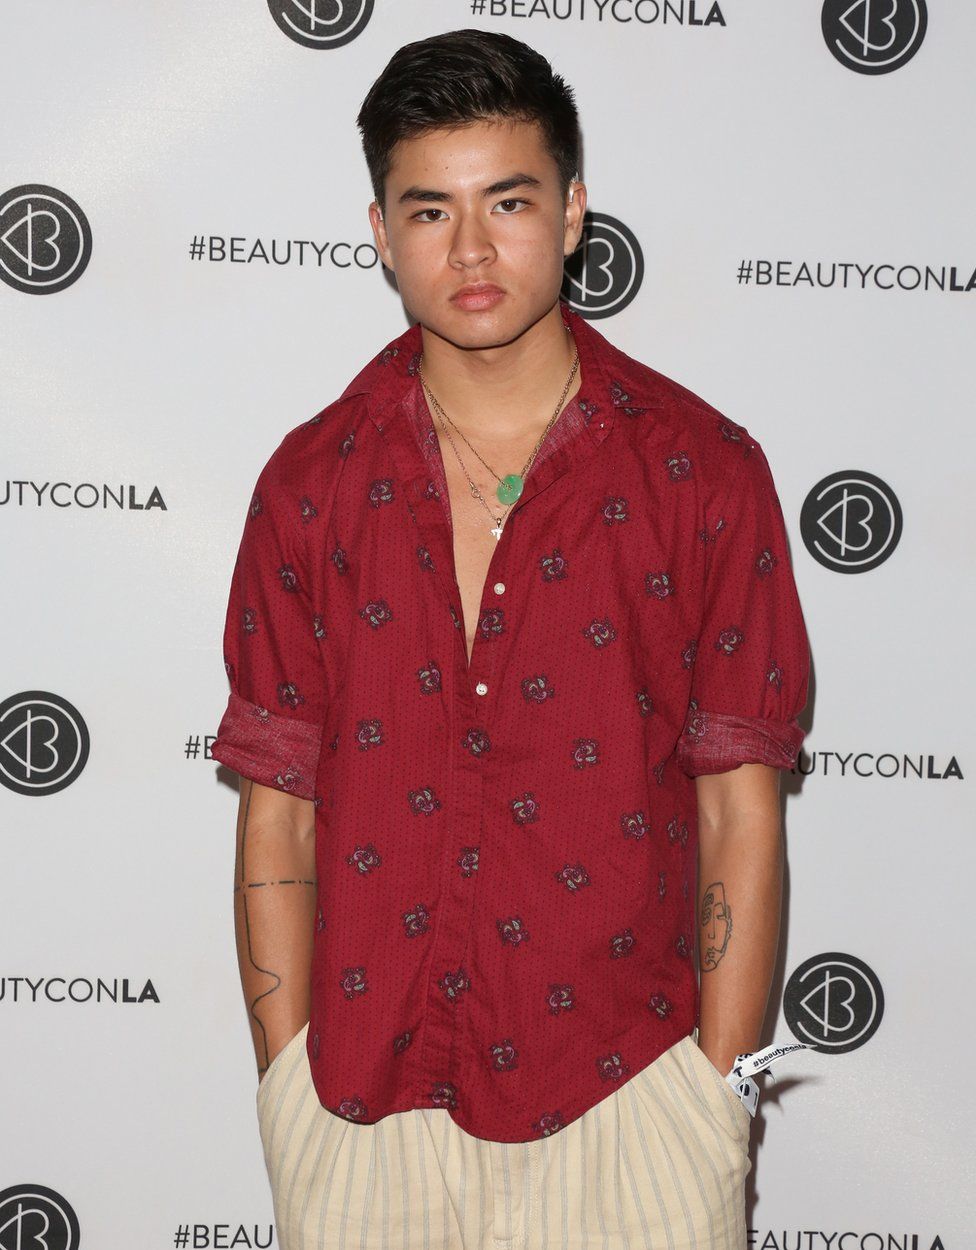 Chella Man attends the Beautycon Festival LA 2018 at Los Angeles Convention Center on July 15, 2018 in Los Angeles, California